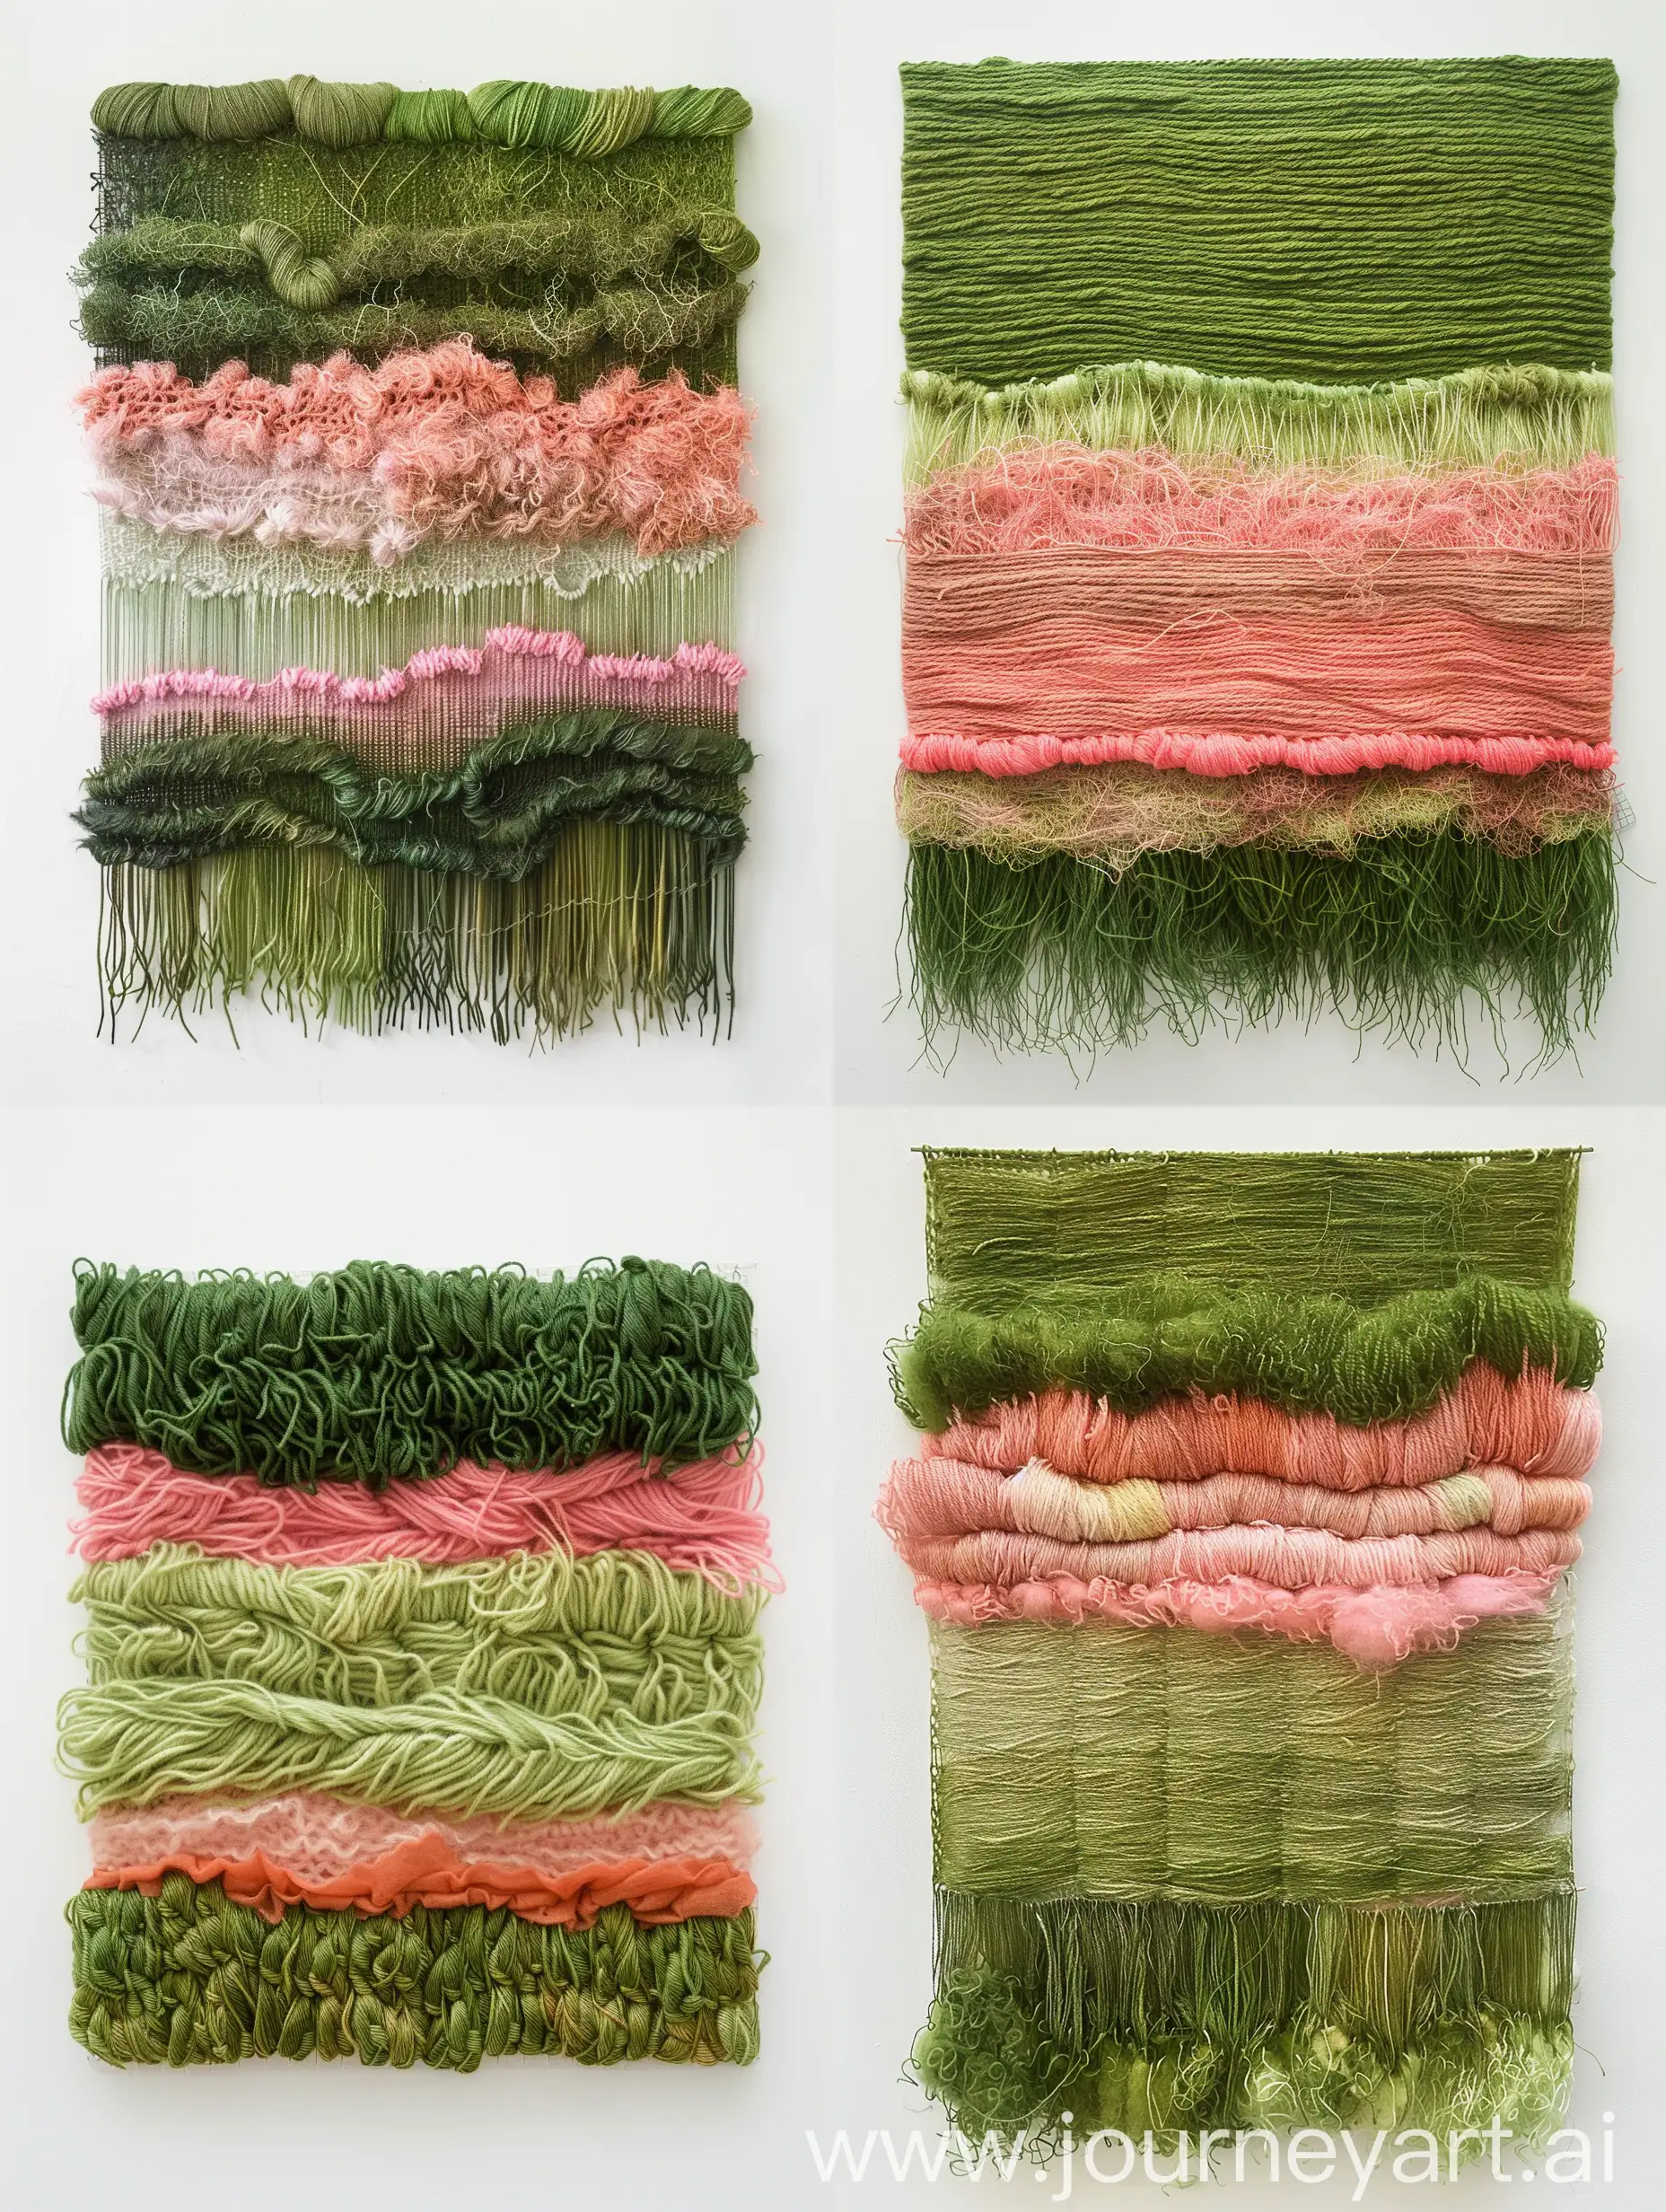 decorative wall piece made basically of cotton threads. The first layer of yarn is moss green, the second layer is a mix of pink and light green yarns and the third layer is salmon colored.